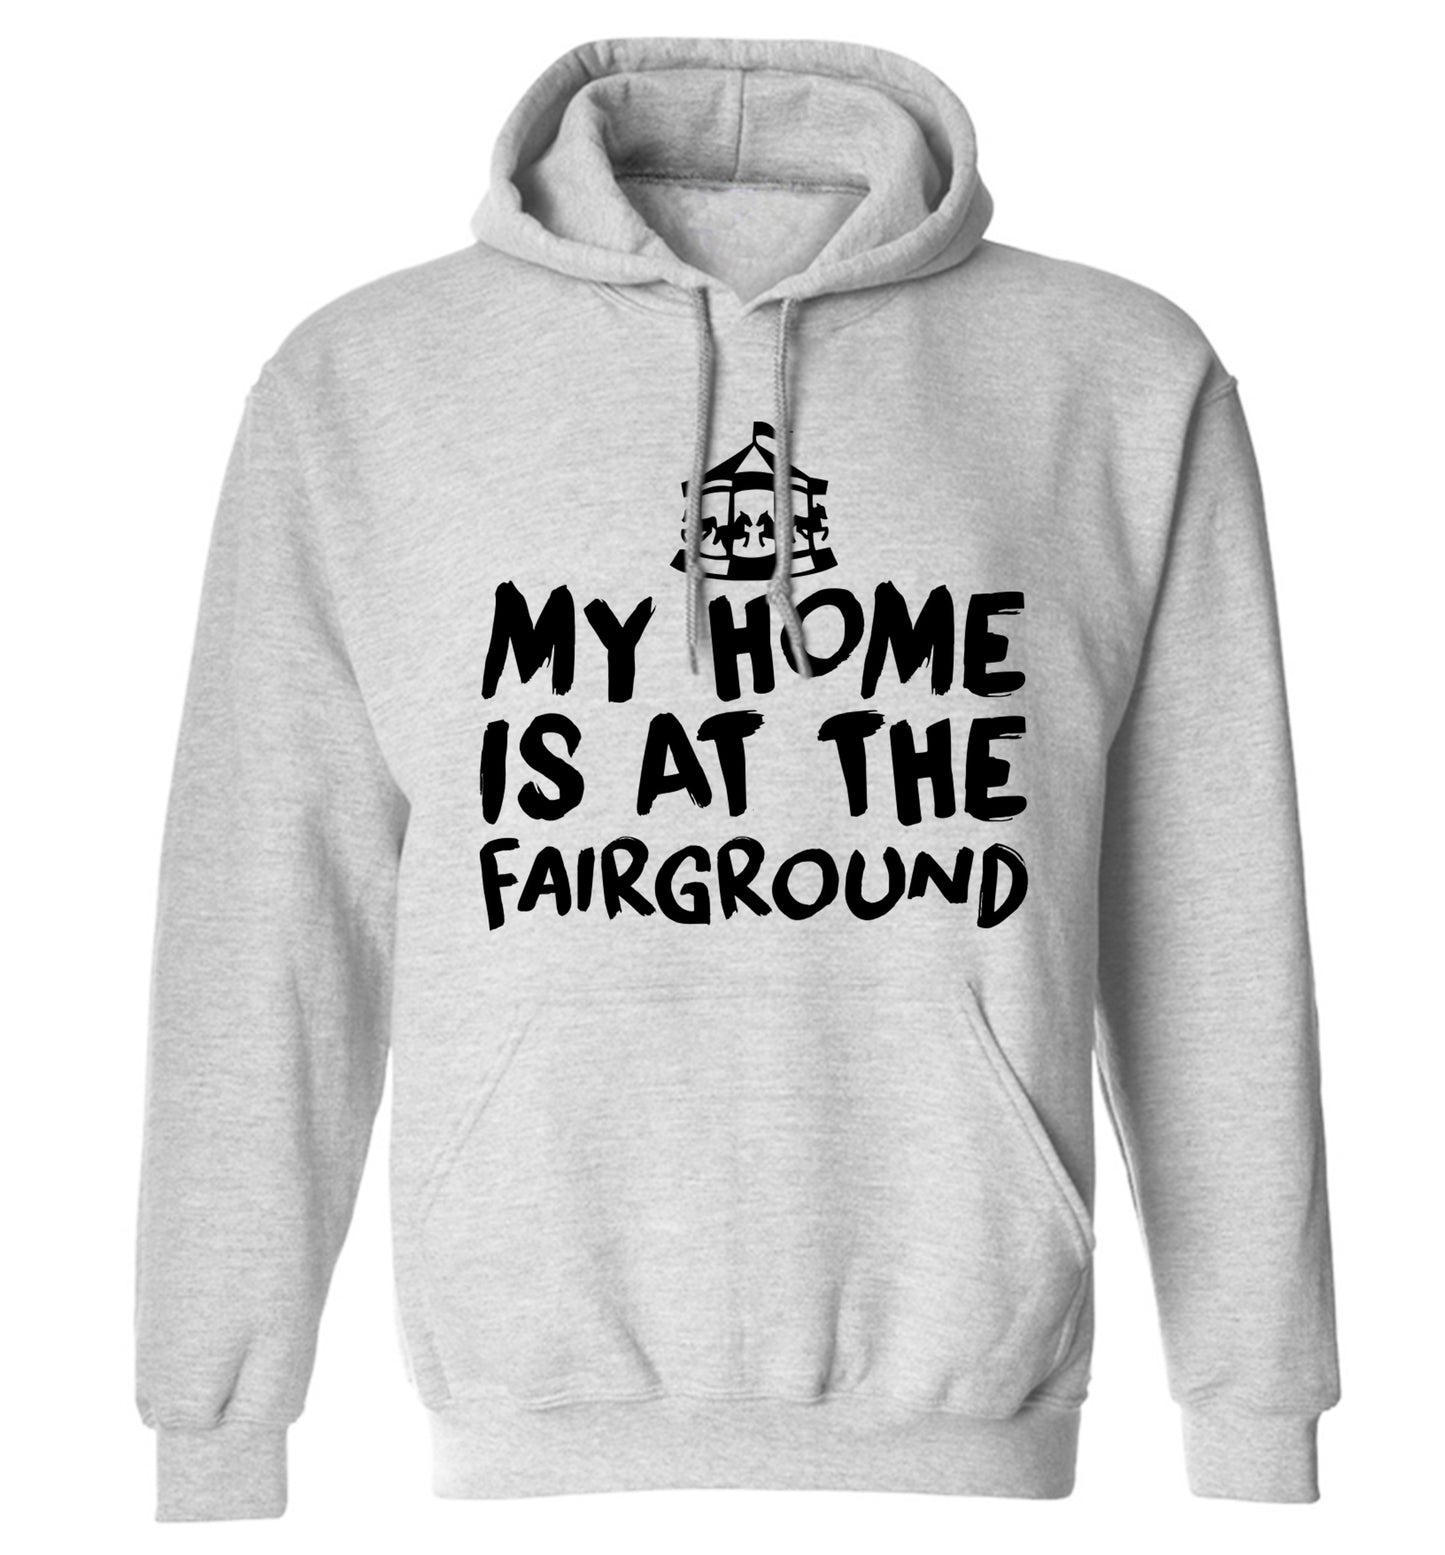 My home is at the fairground adults unisex grey hoodie 2XL